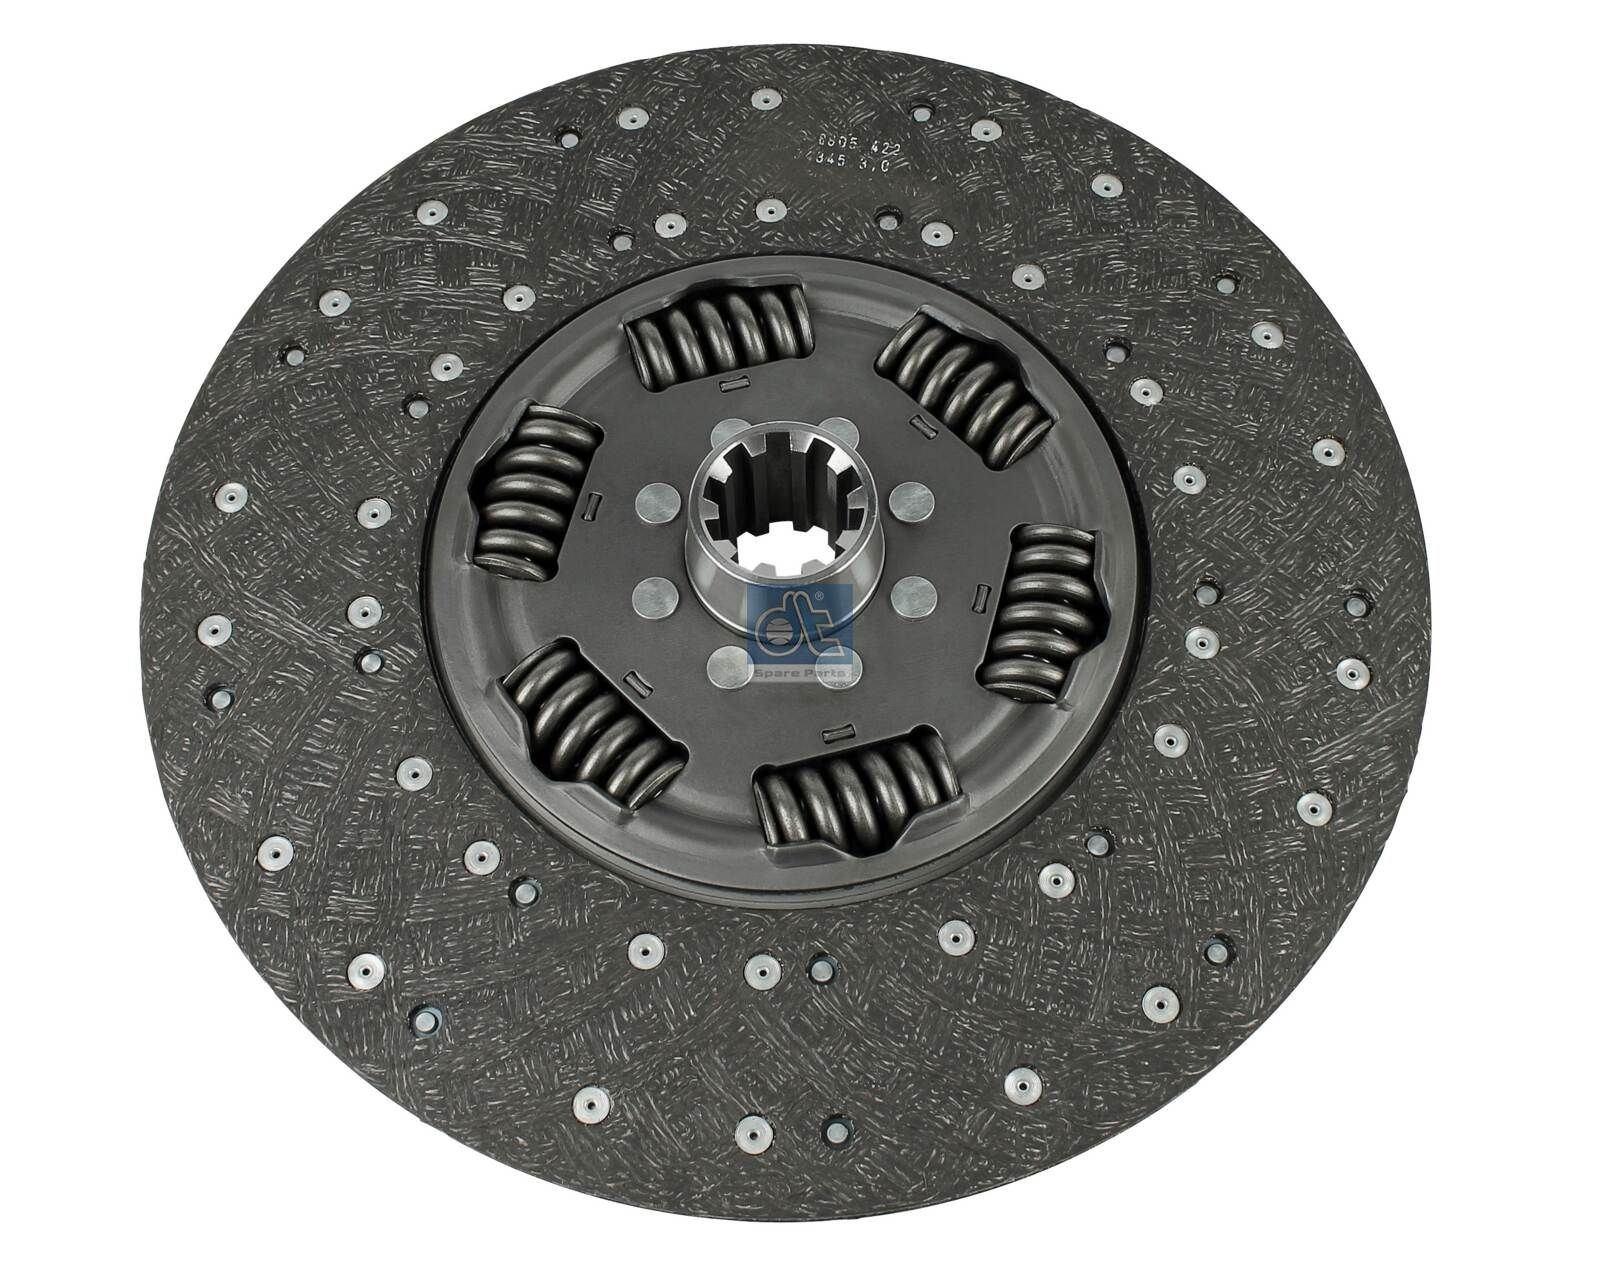 1878 000 298 DT Spare Parts 430mm, Number of Teeth: 10 Clutch Plate 5.50057 buy